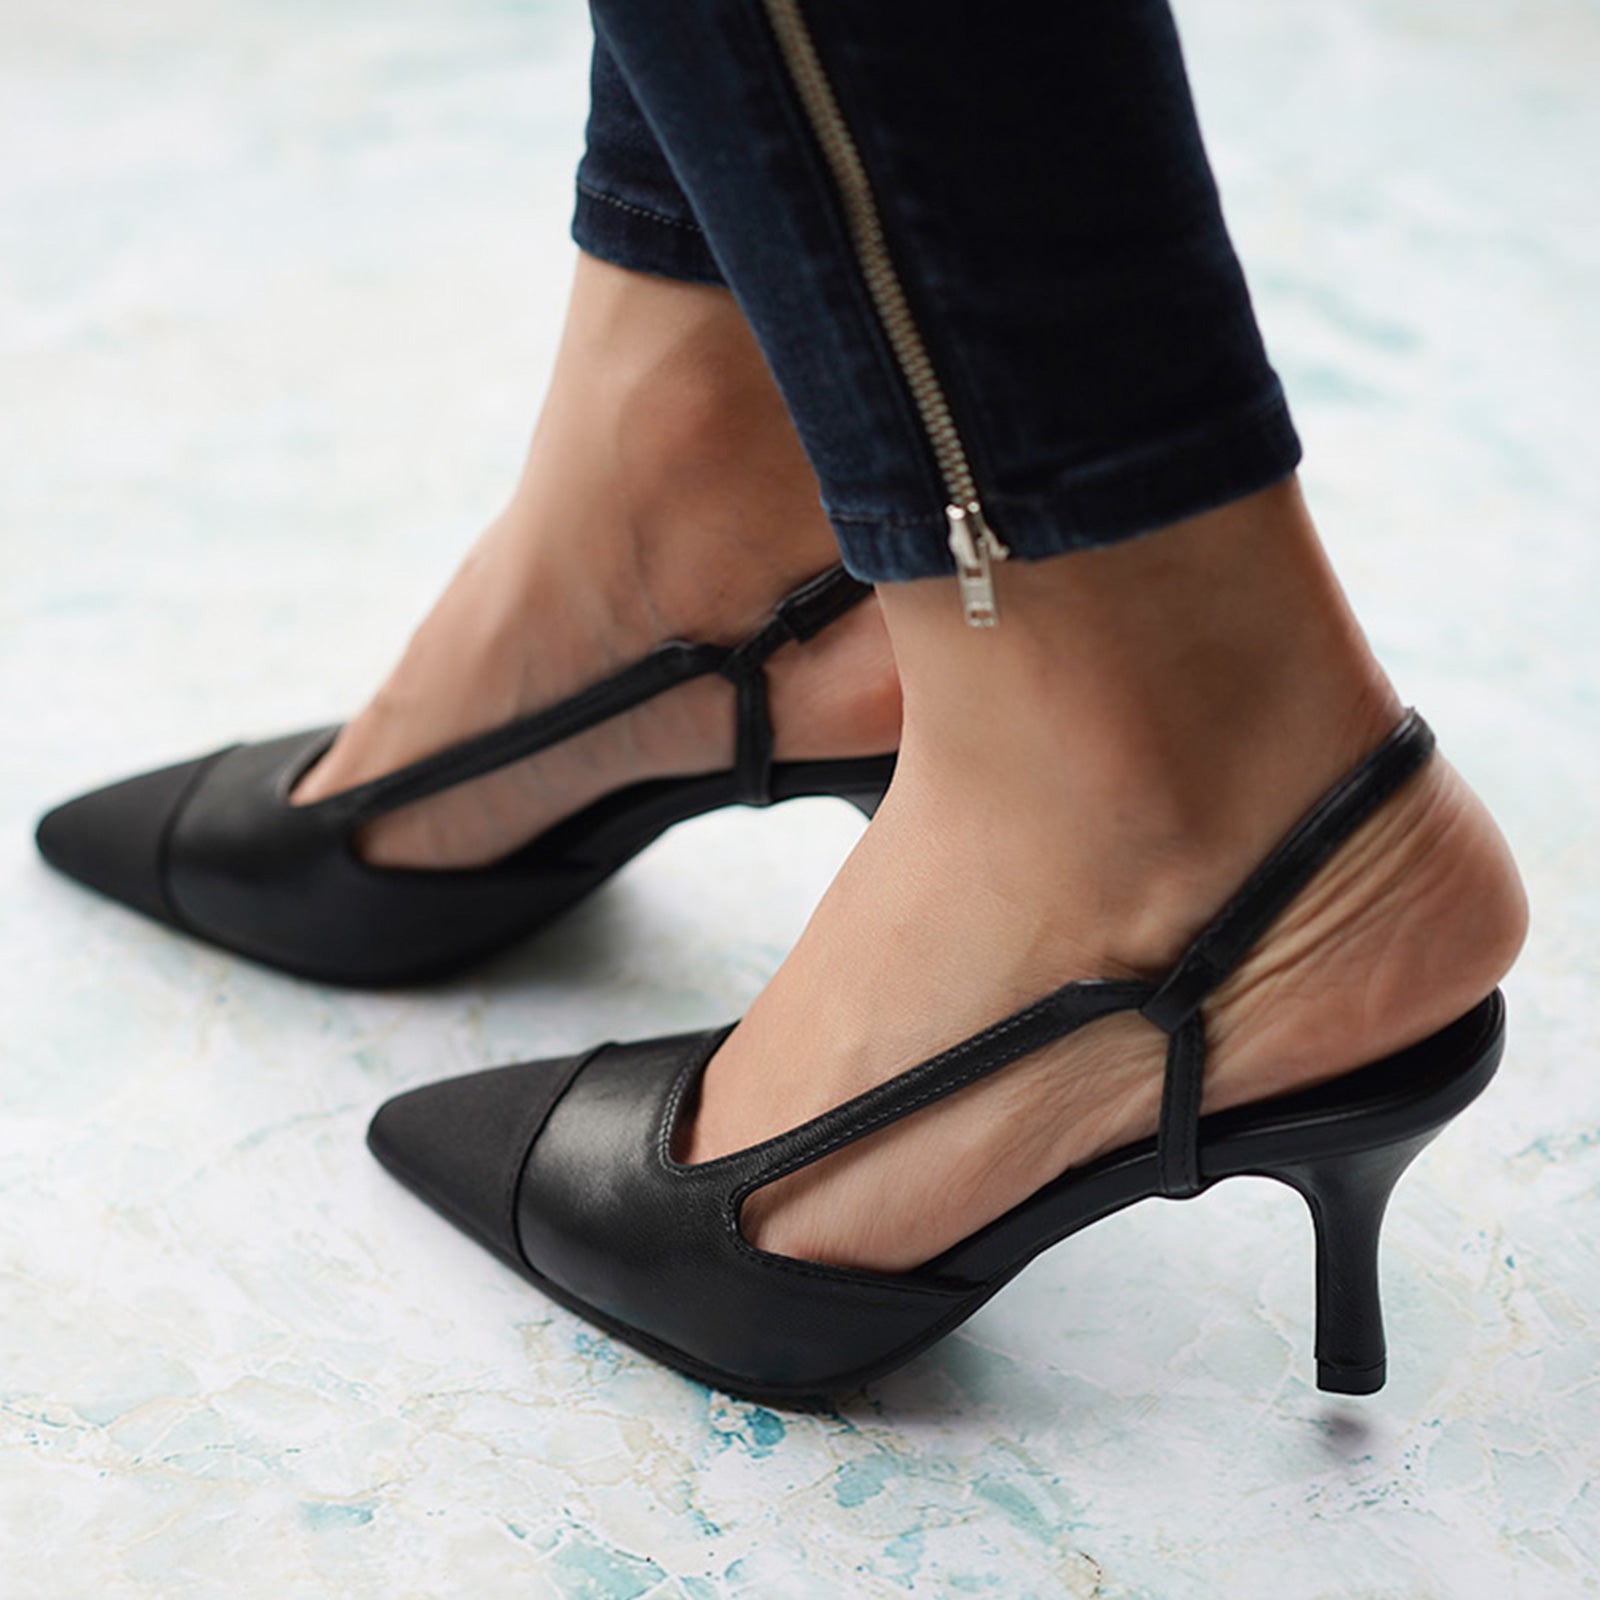  Black Slingback Pumps with a pointed toe, a modern and edgy option for city living with a touch of sophistication